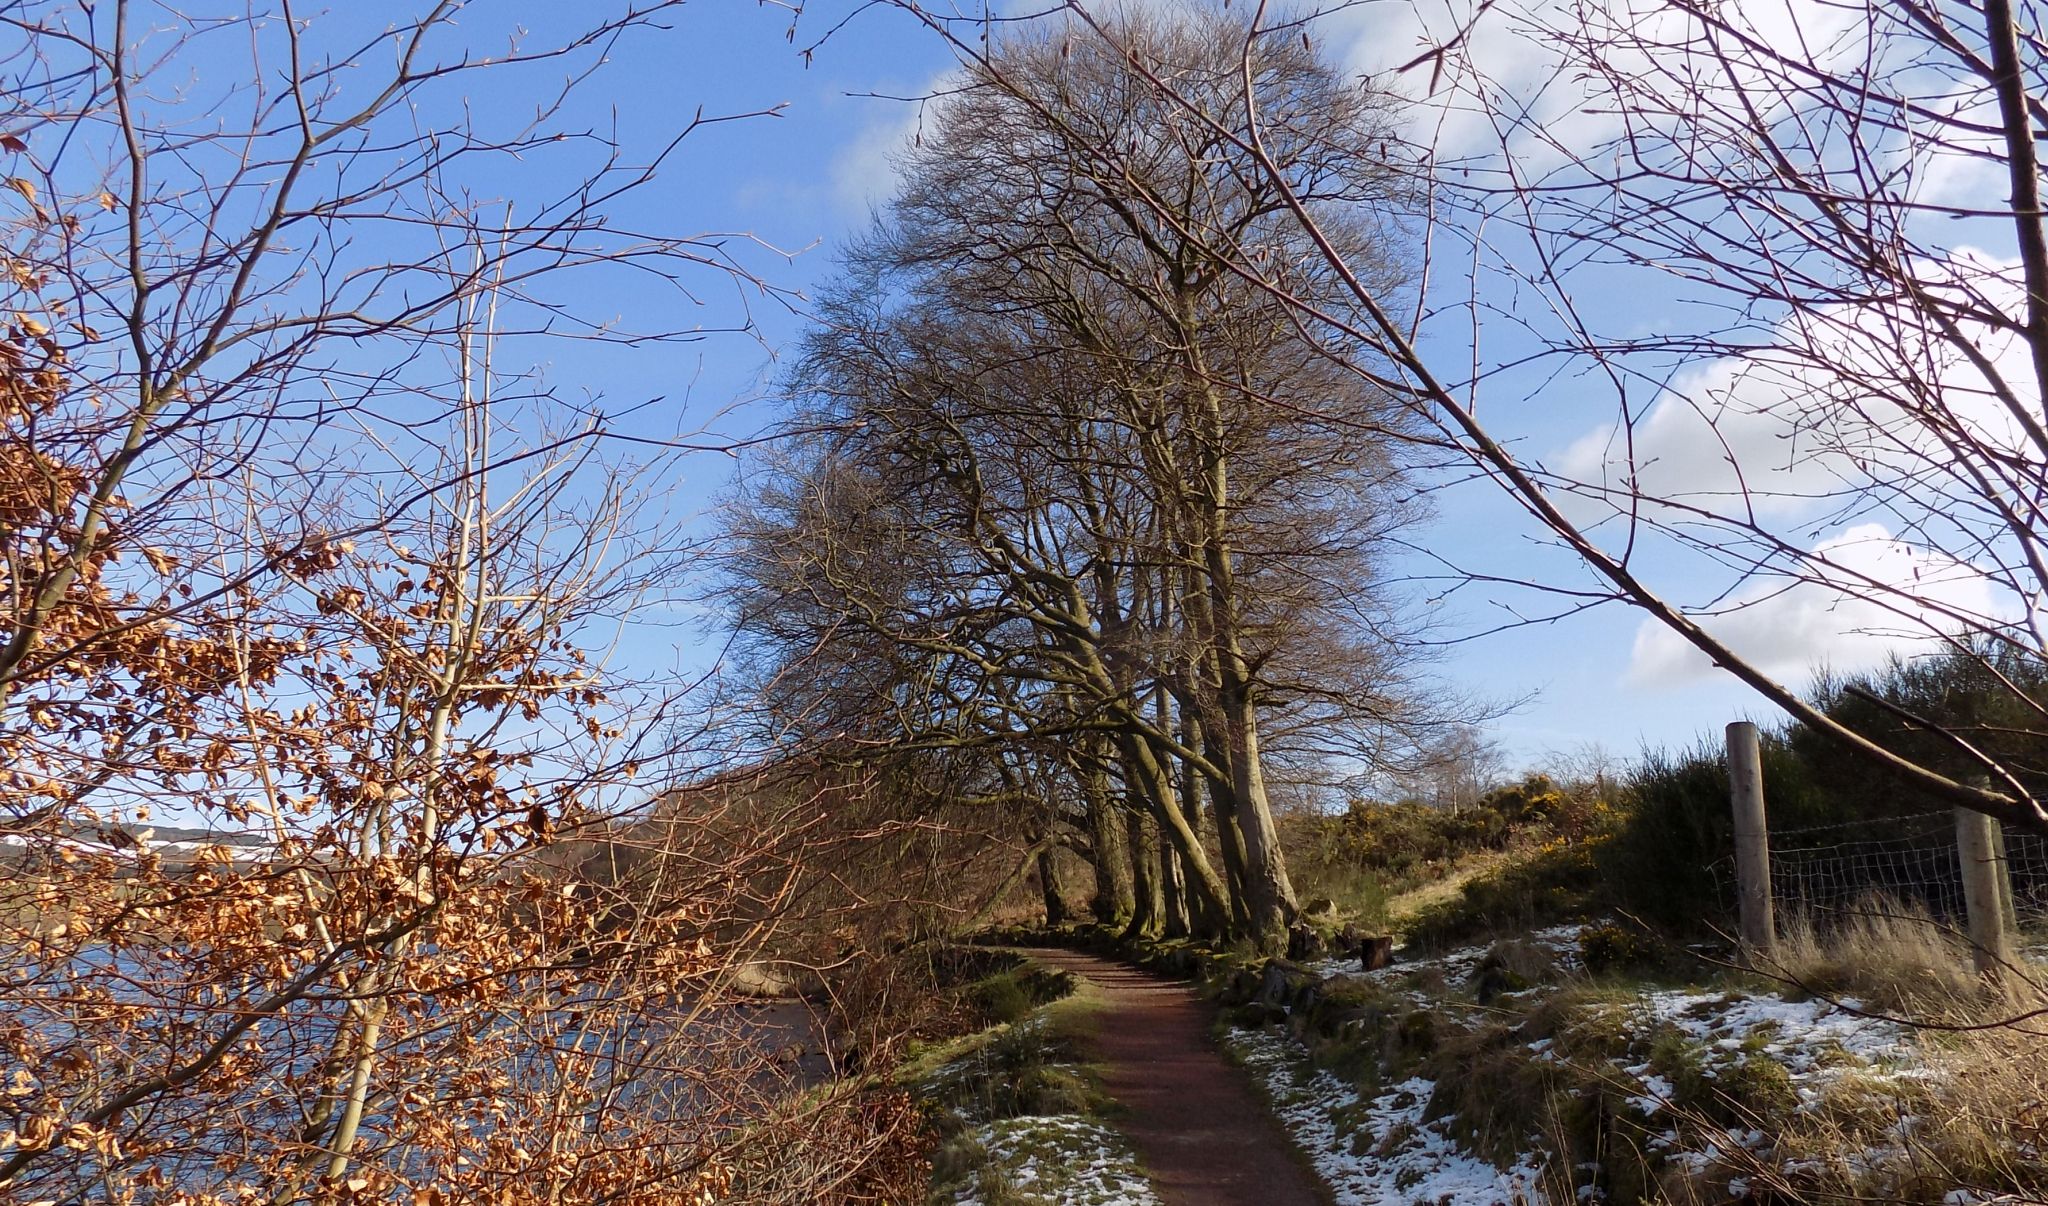 Mill Path on the south side of Banton Loch to Banton Village